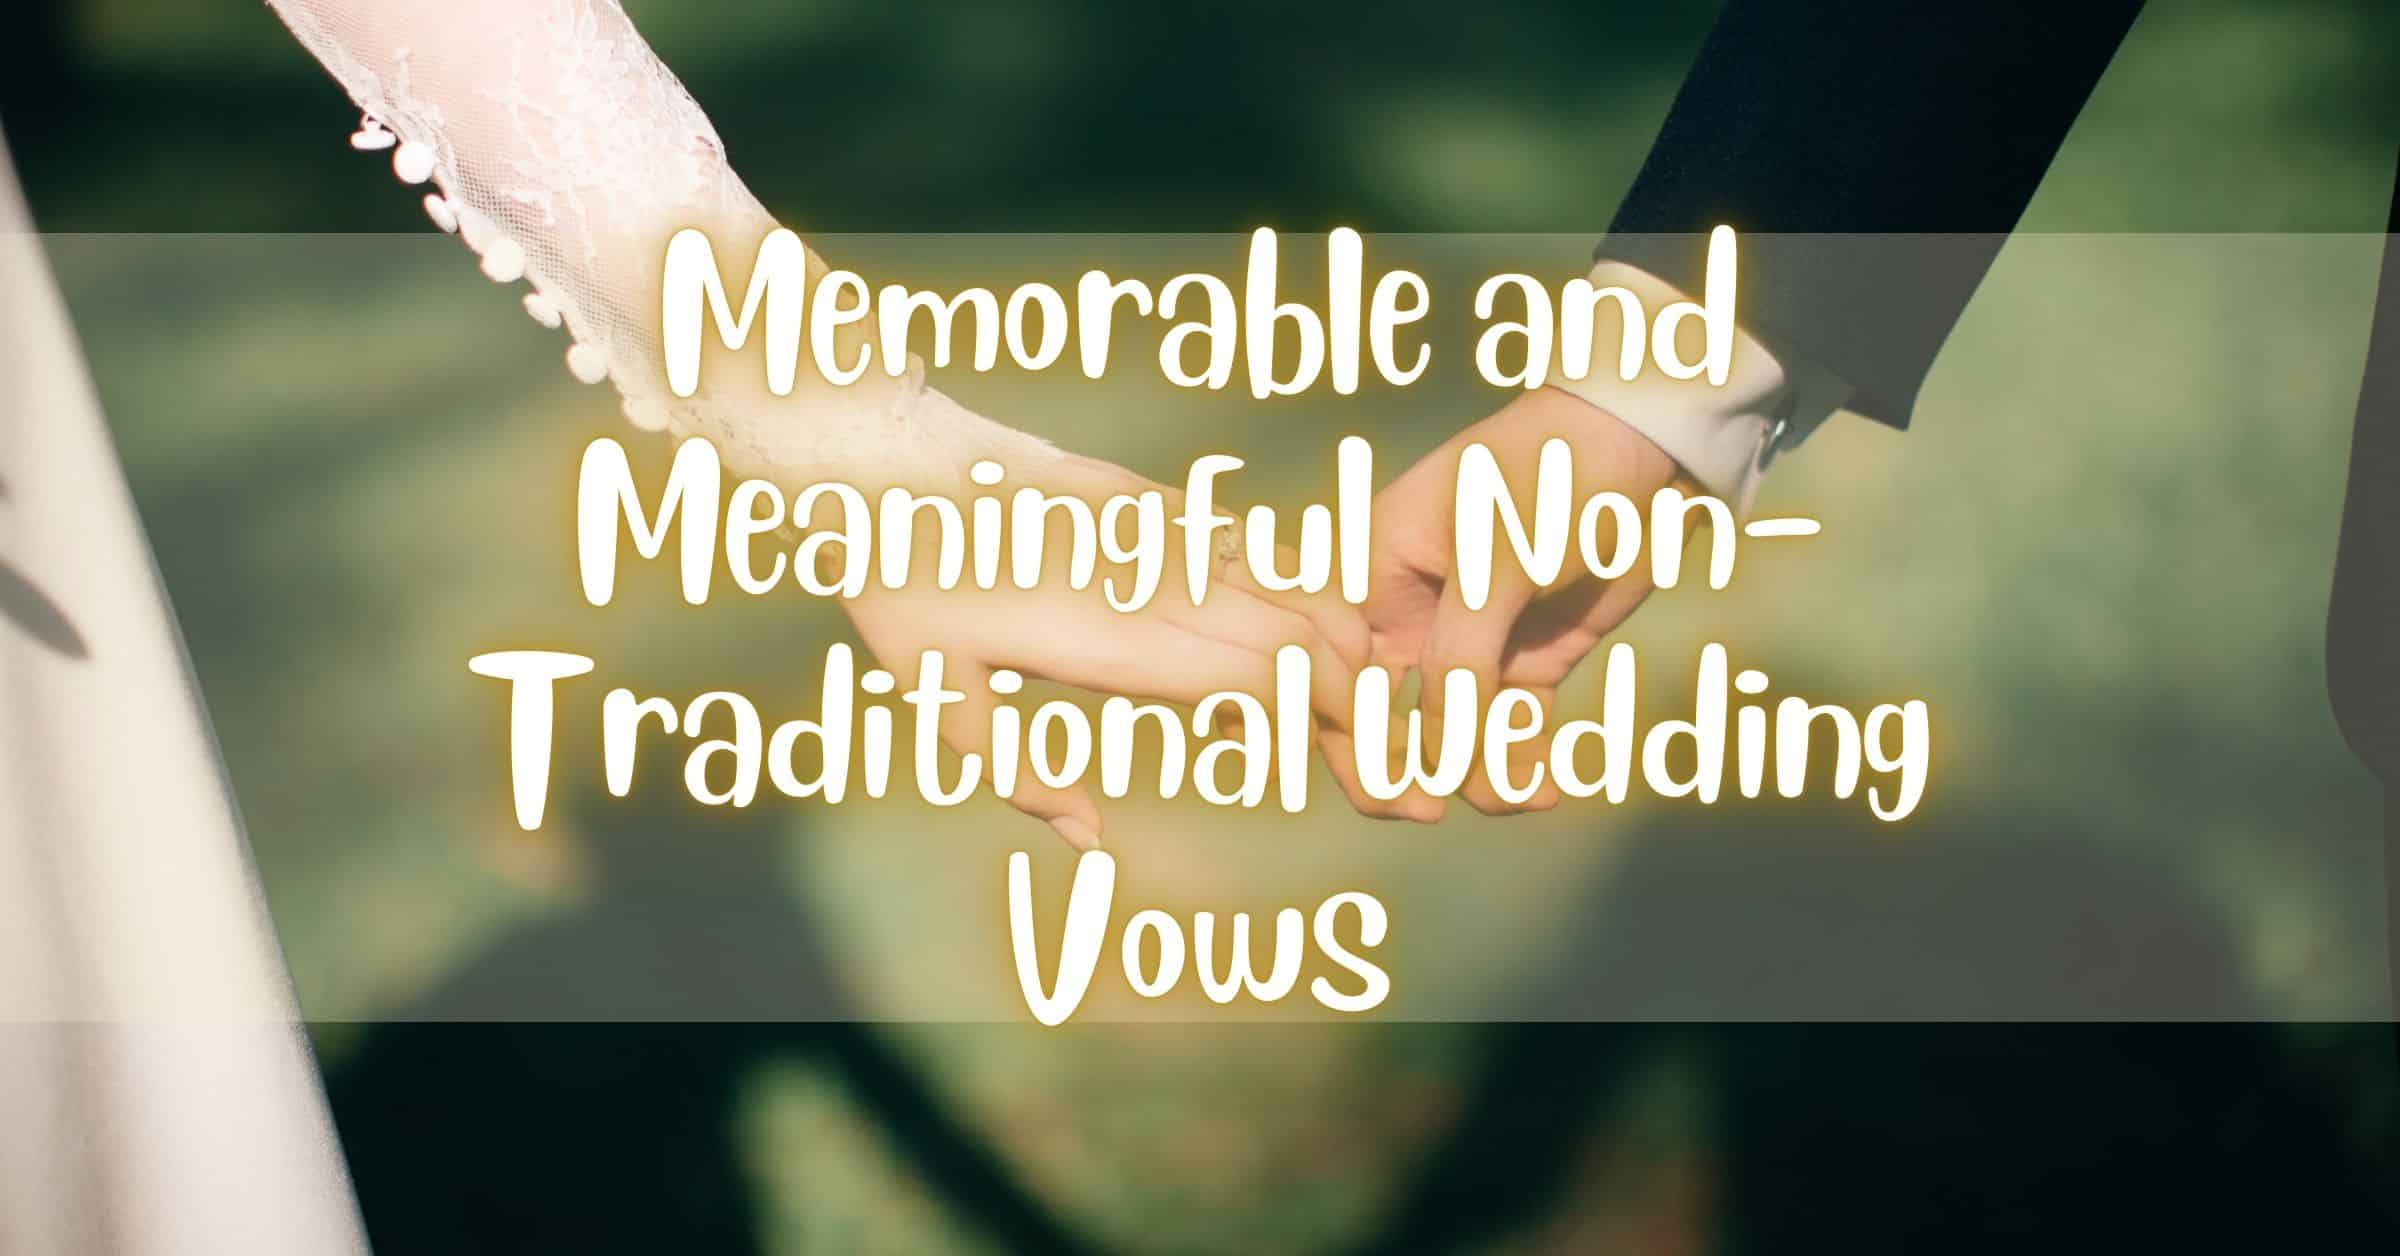 Memorable And Meaningful Non-Traditional Wedding Vows